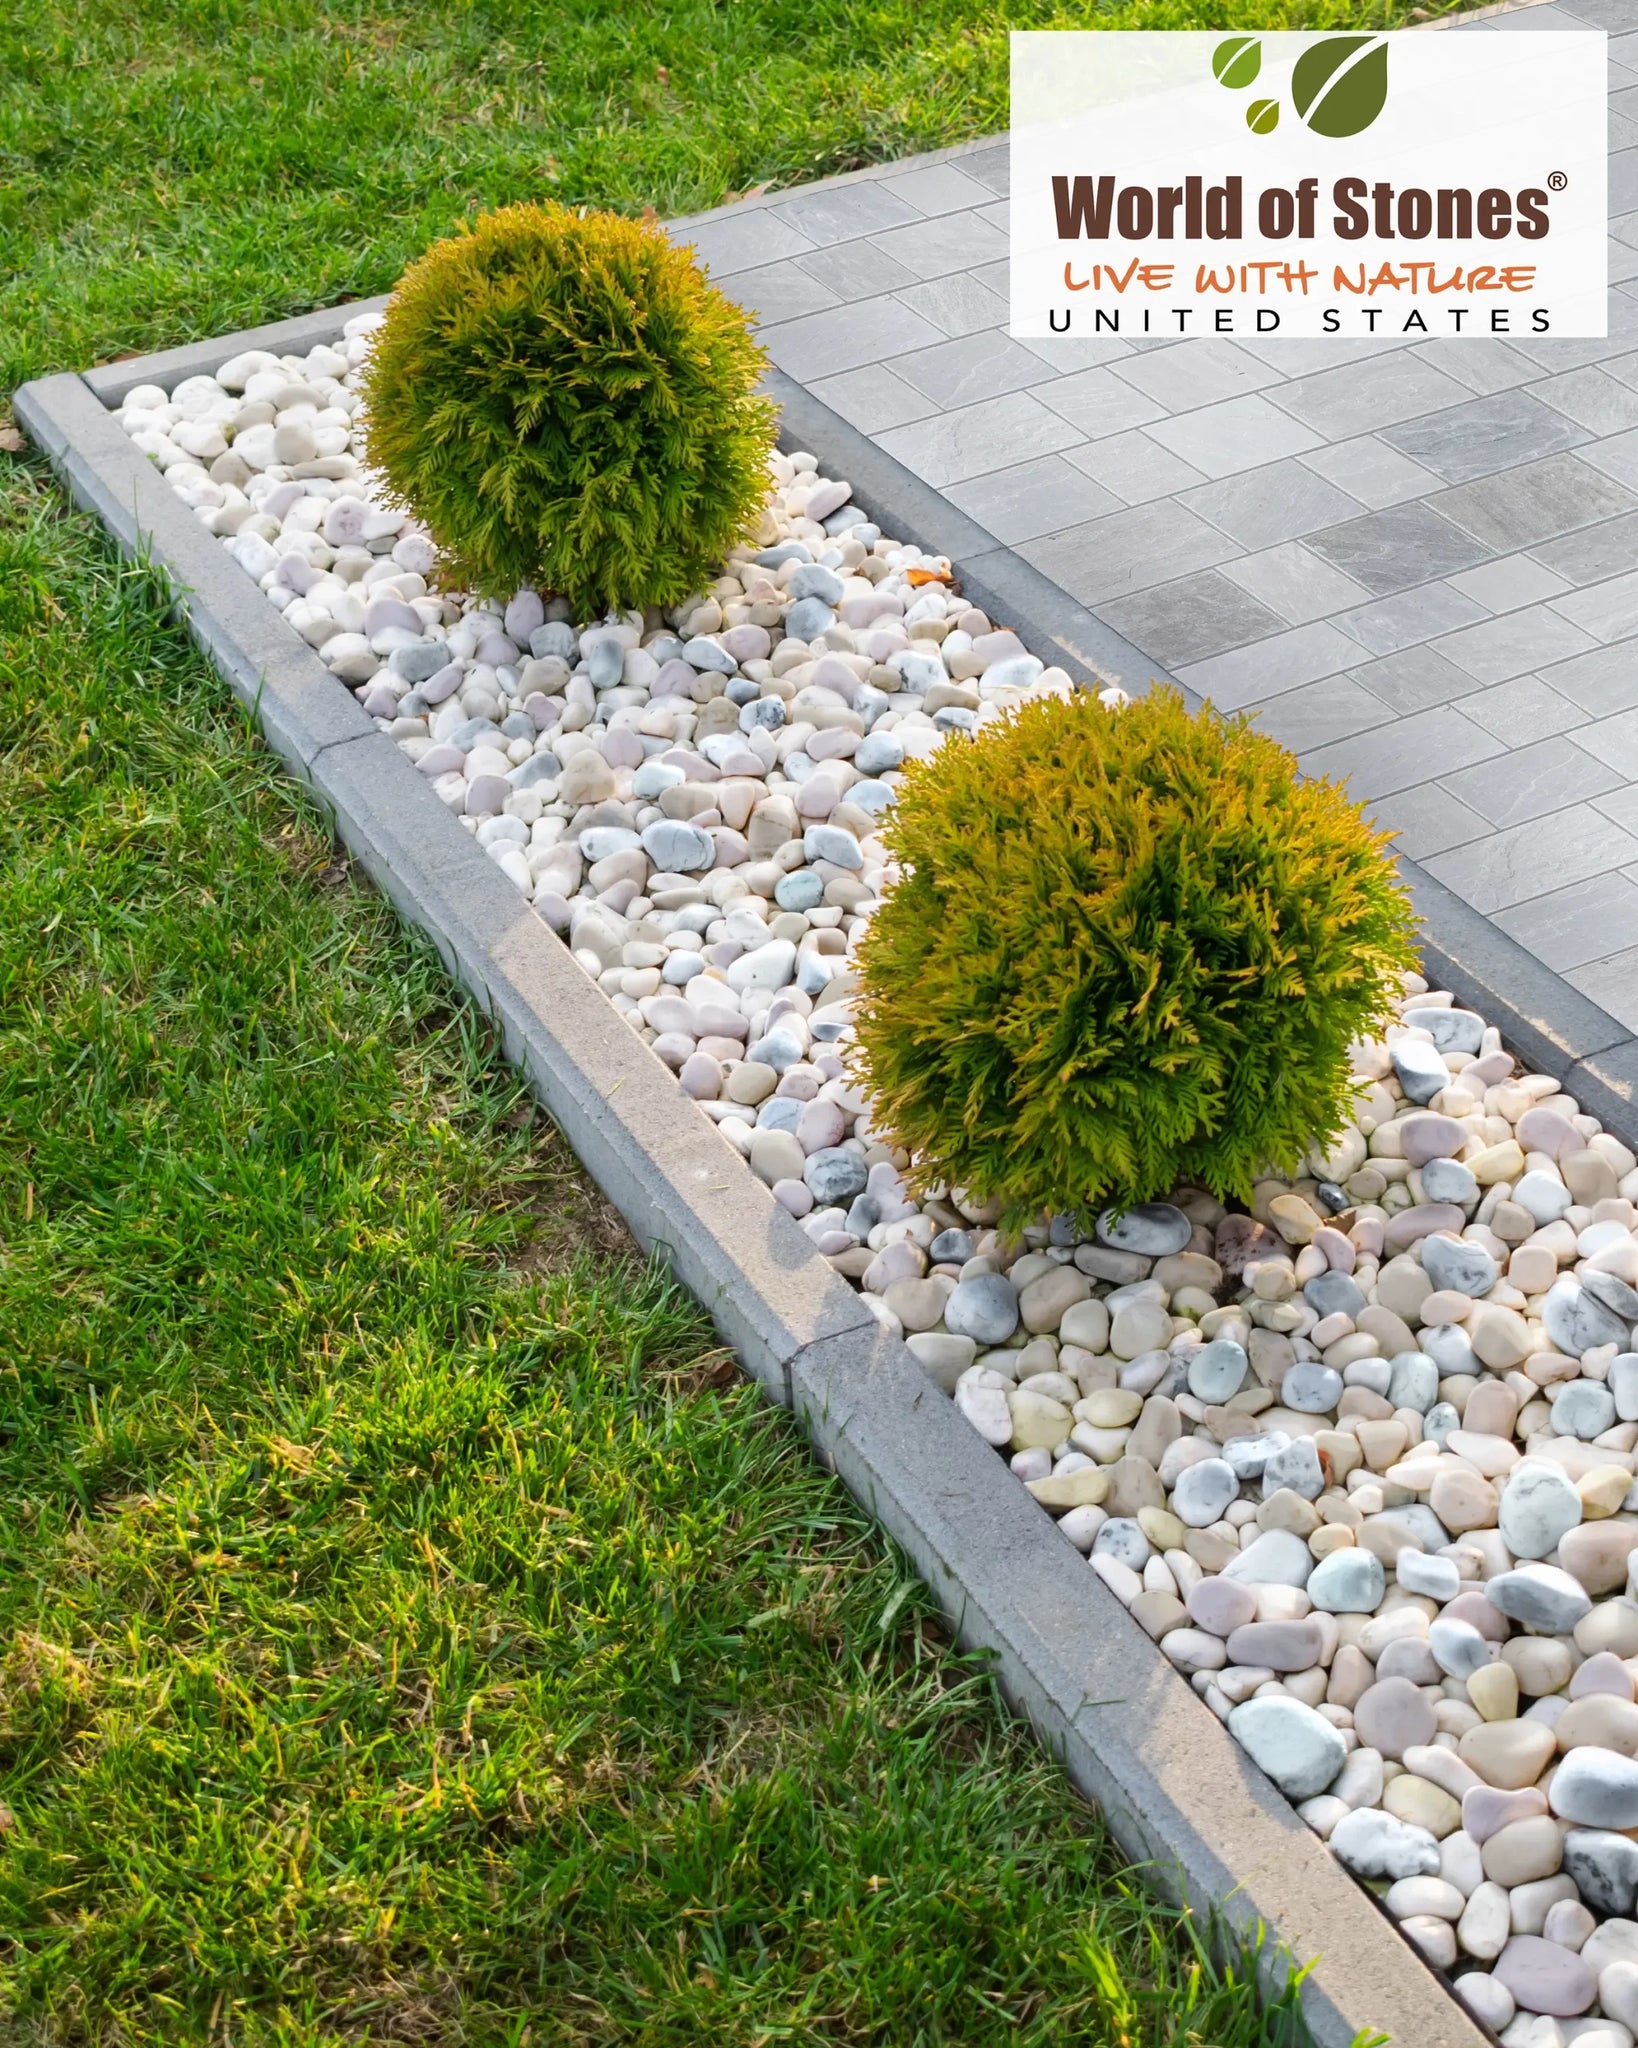 Landscaping with River Rock